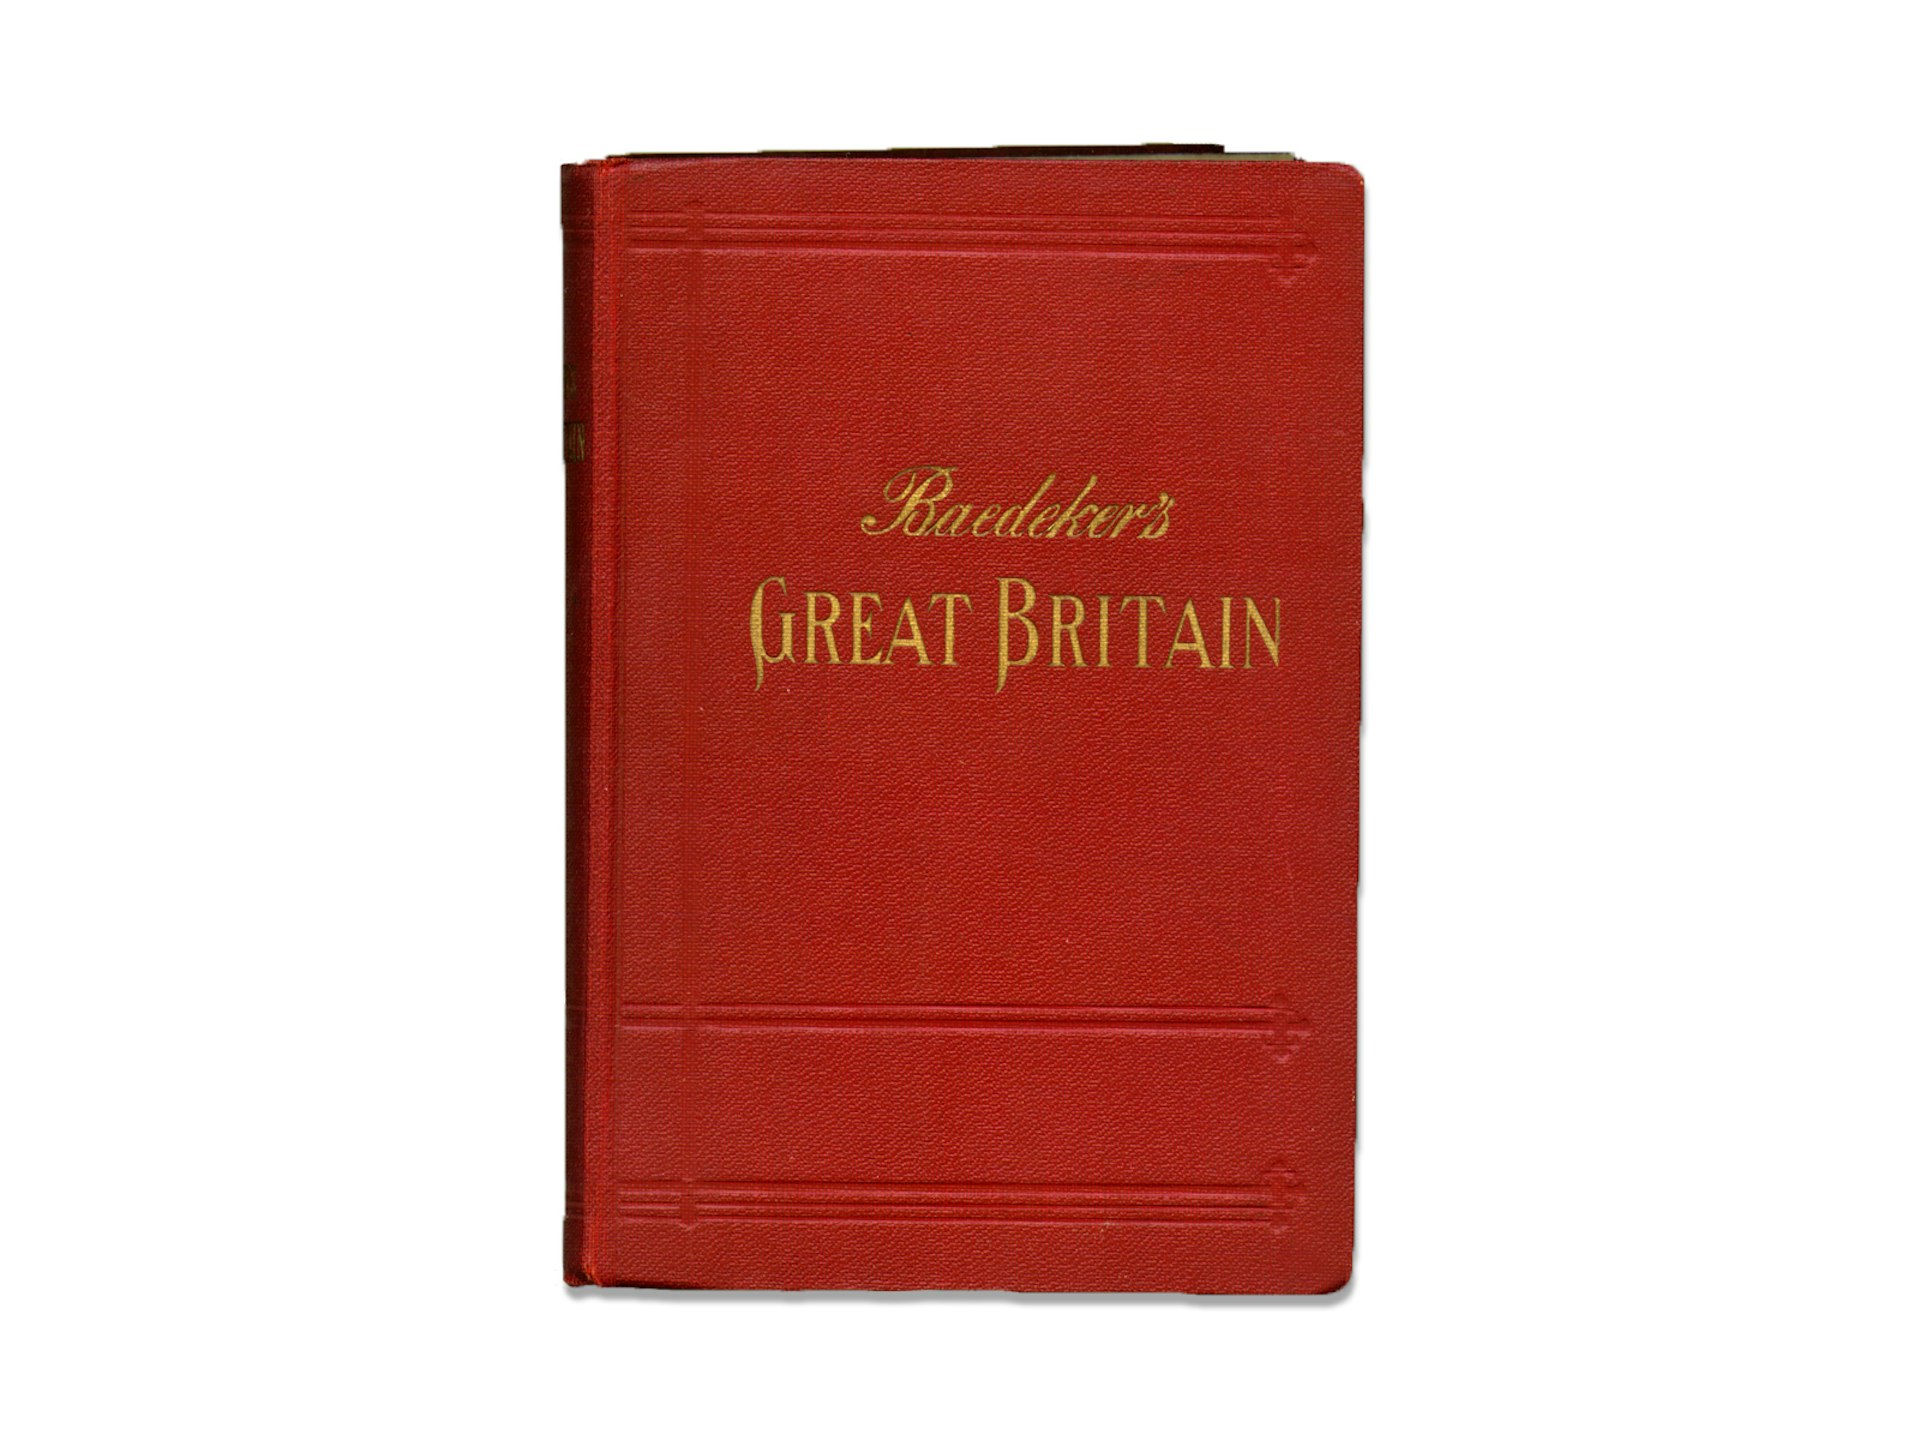 The red cover of Baedeker's Great Briatain.